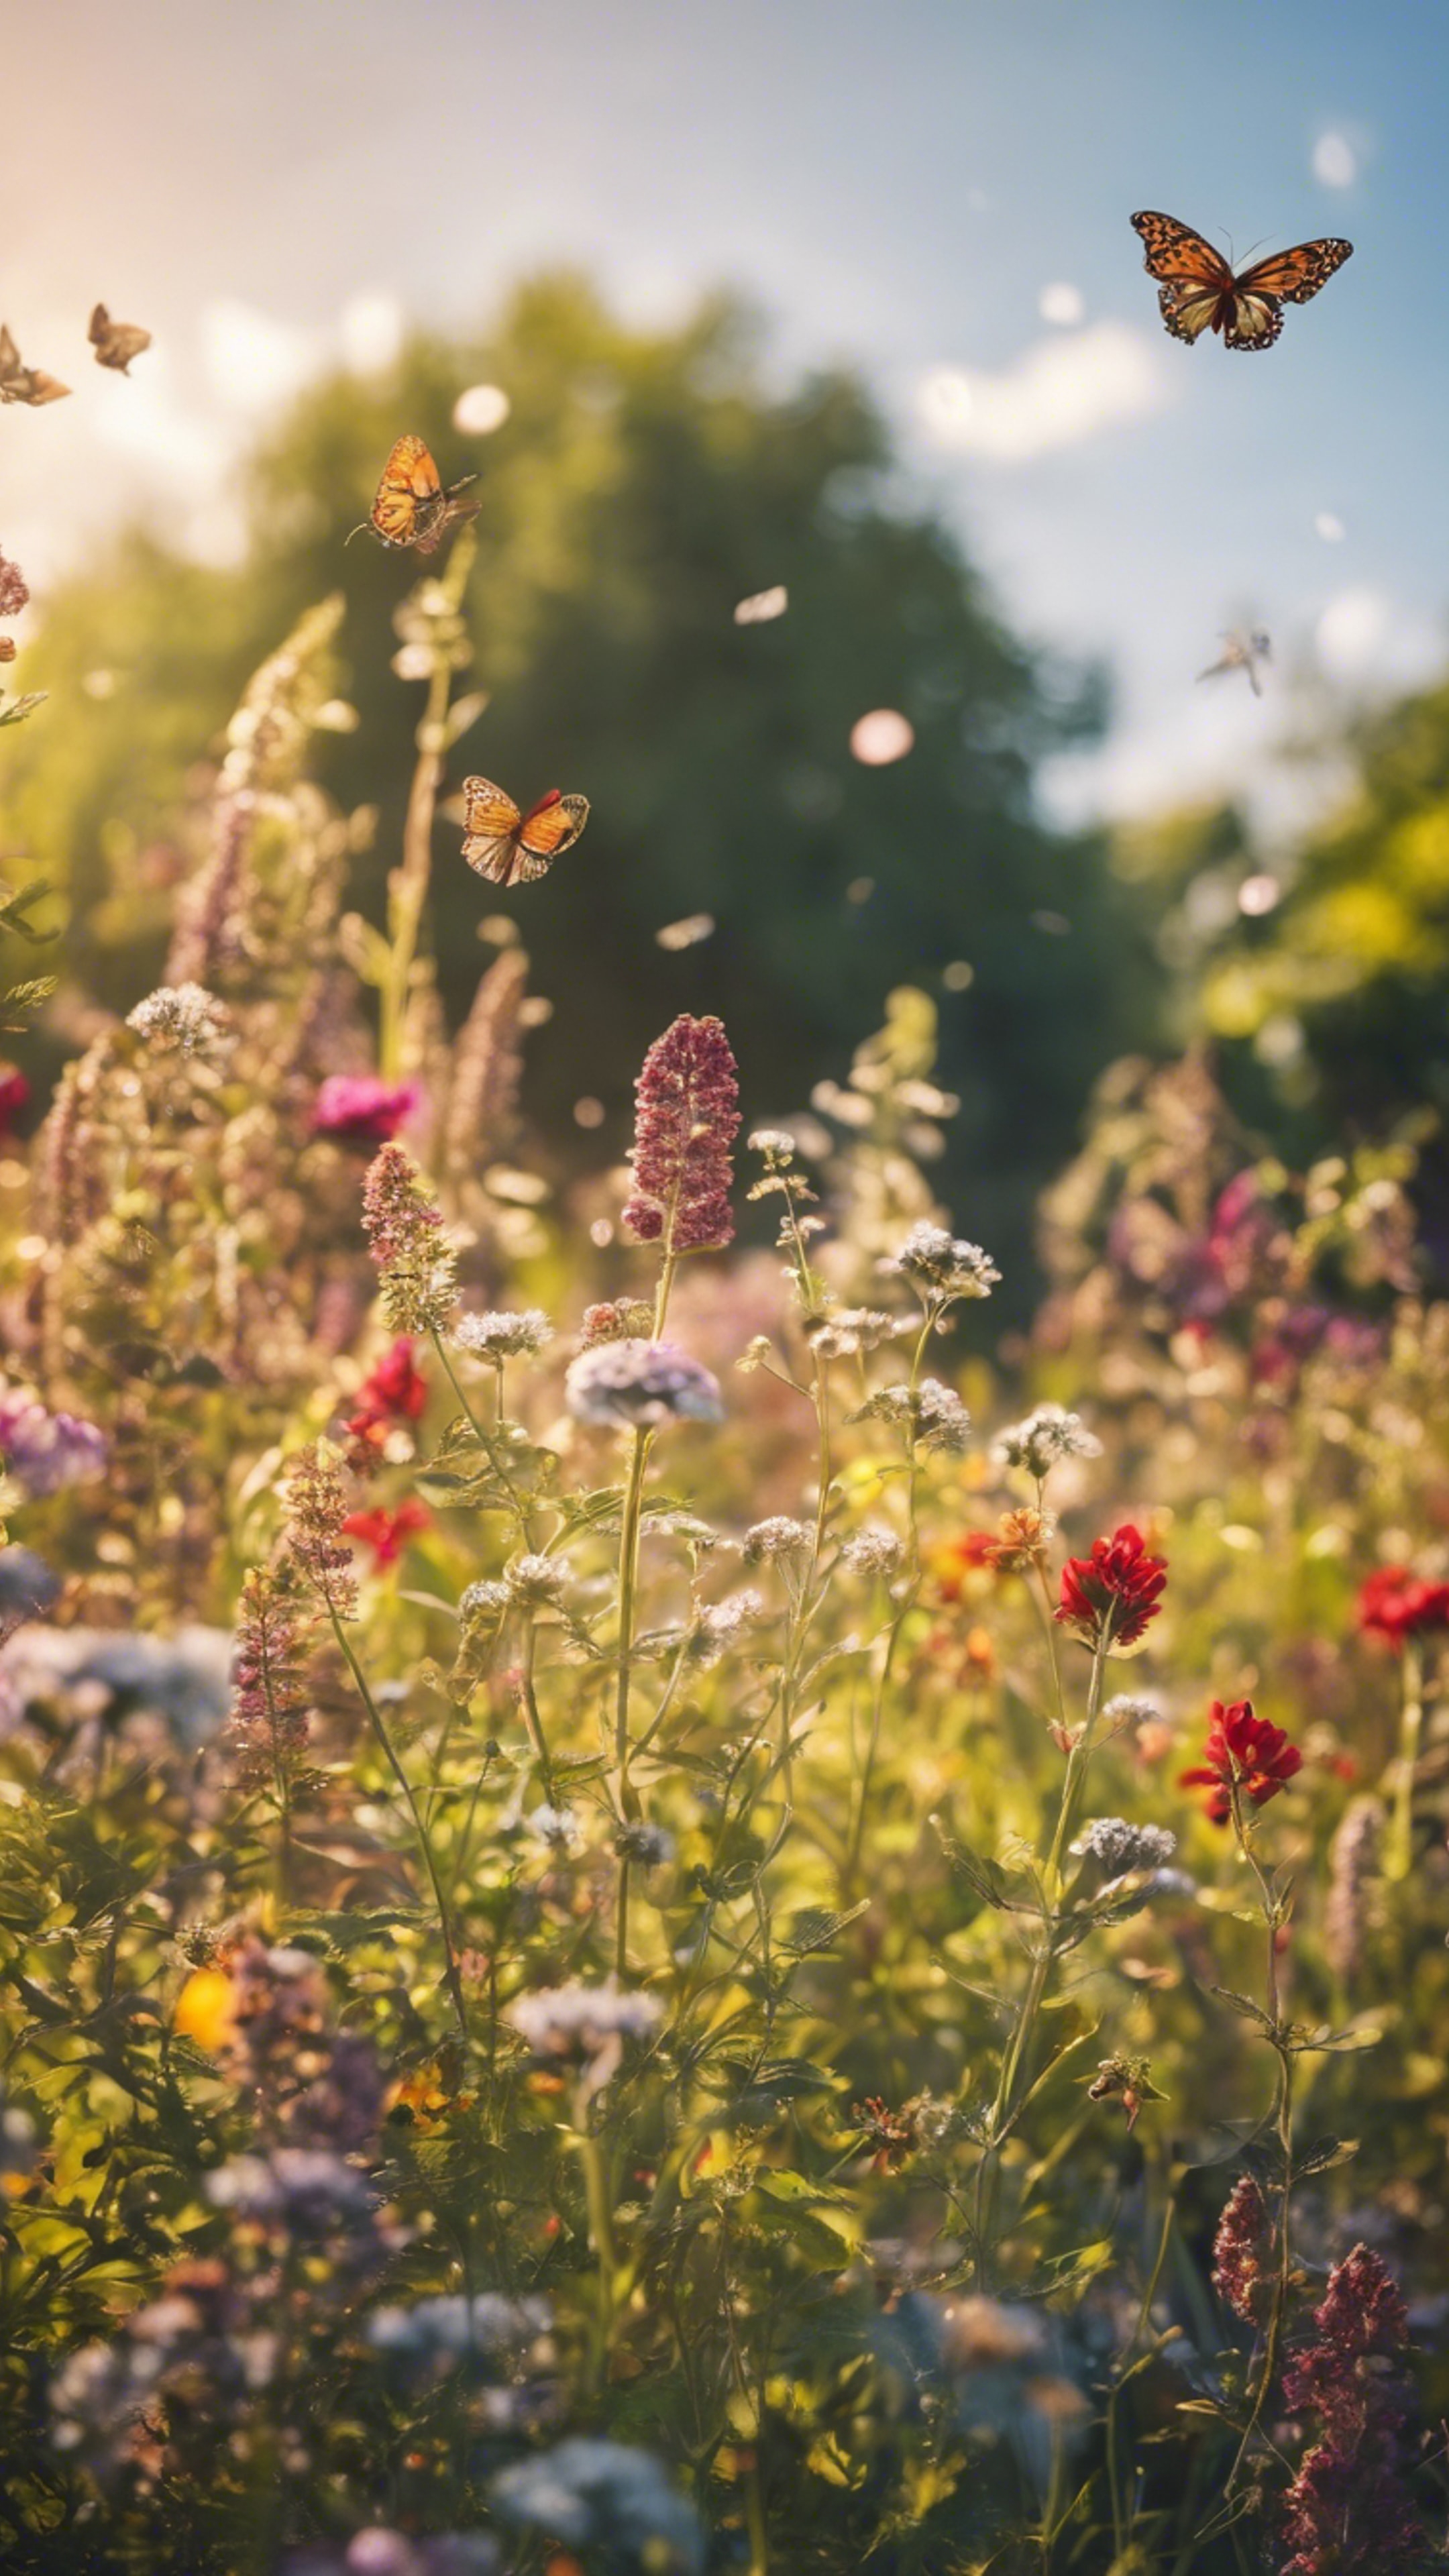 A colorful scene of a French country garden bursting with wildflowers and butterflies under a warm afternoon sun. Wallpaper[d1166188c03b4b319ebf]